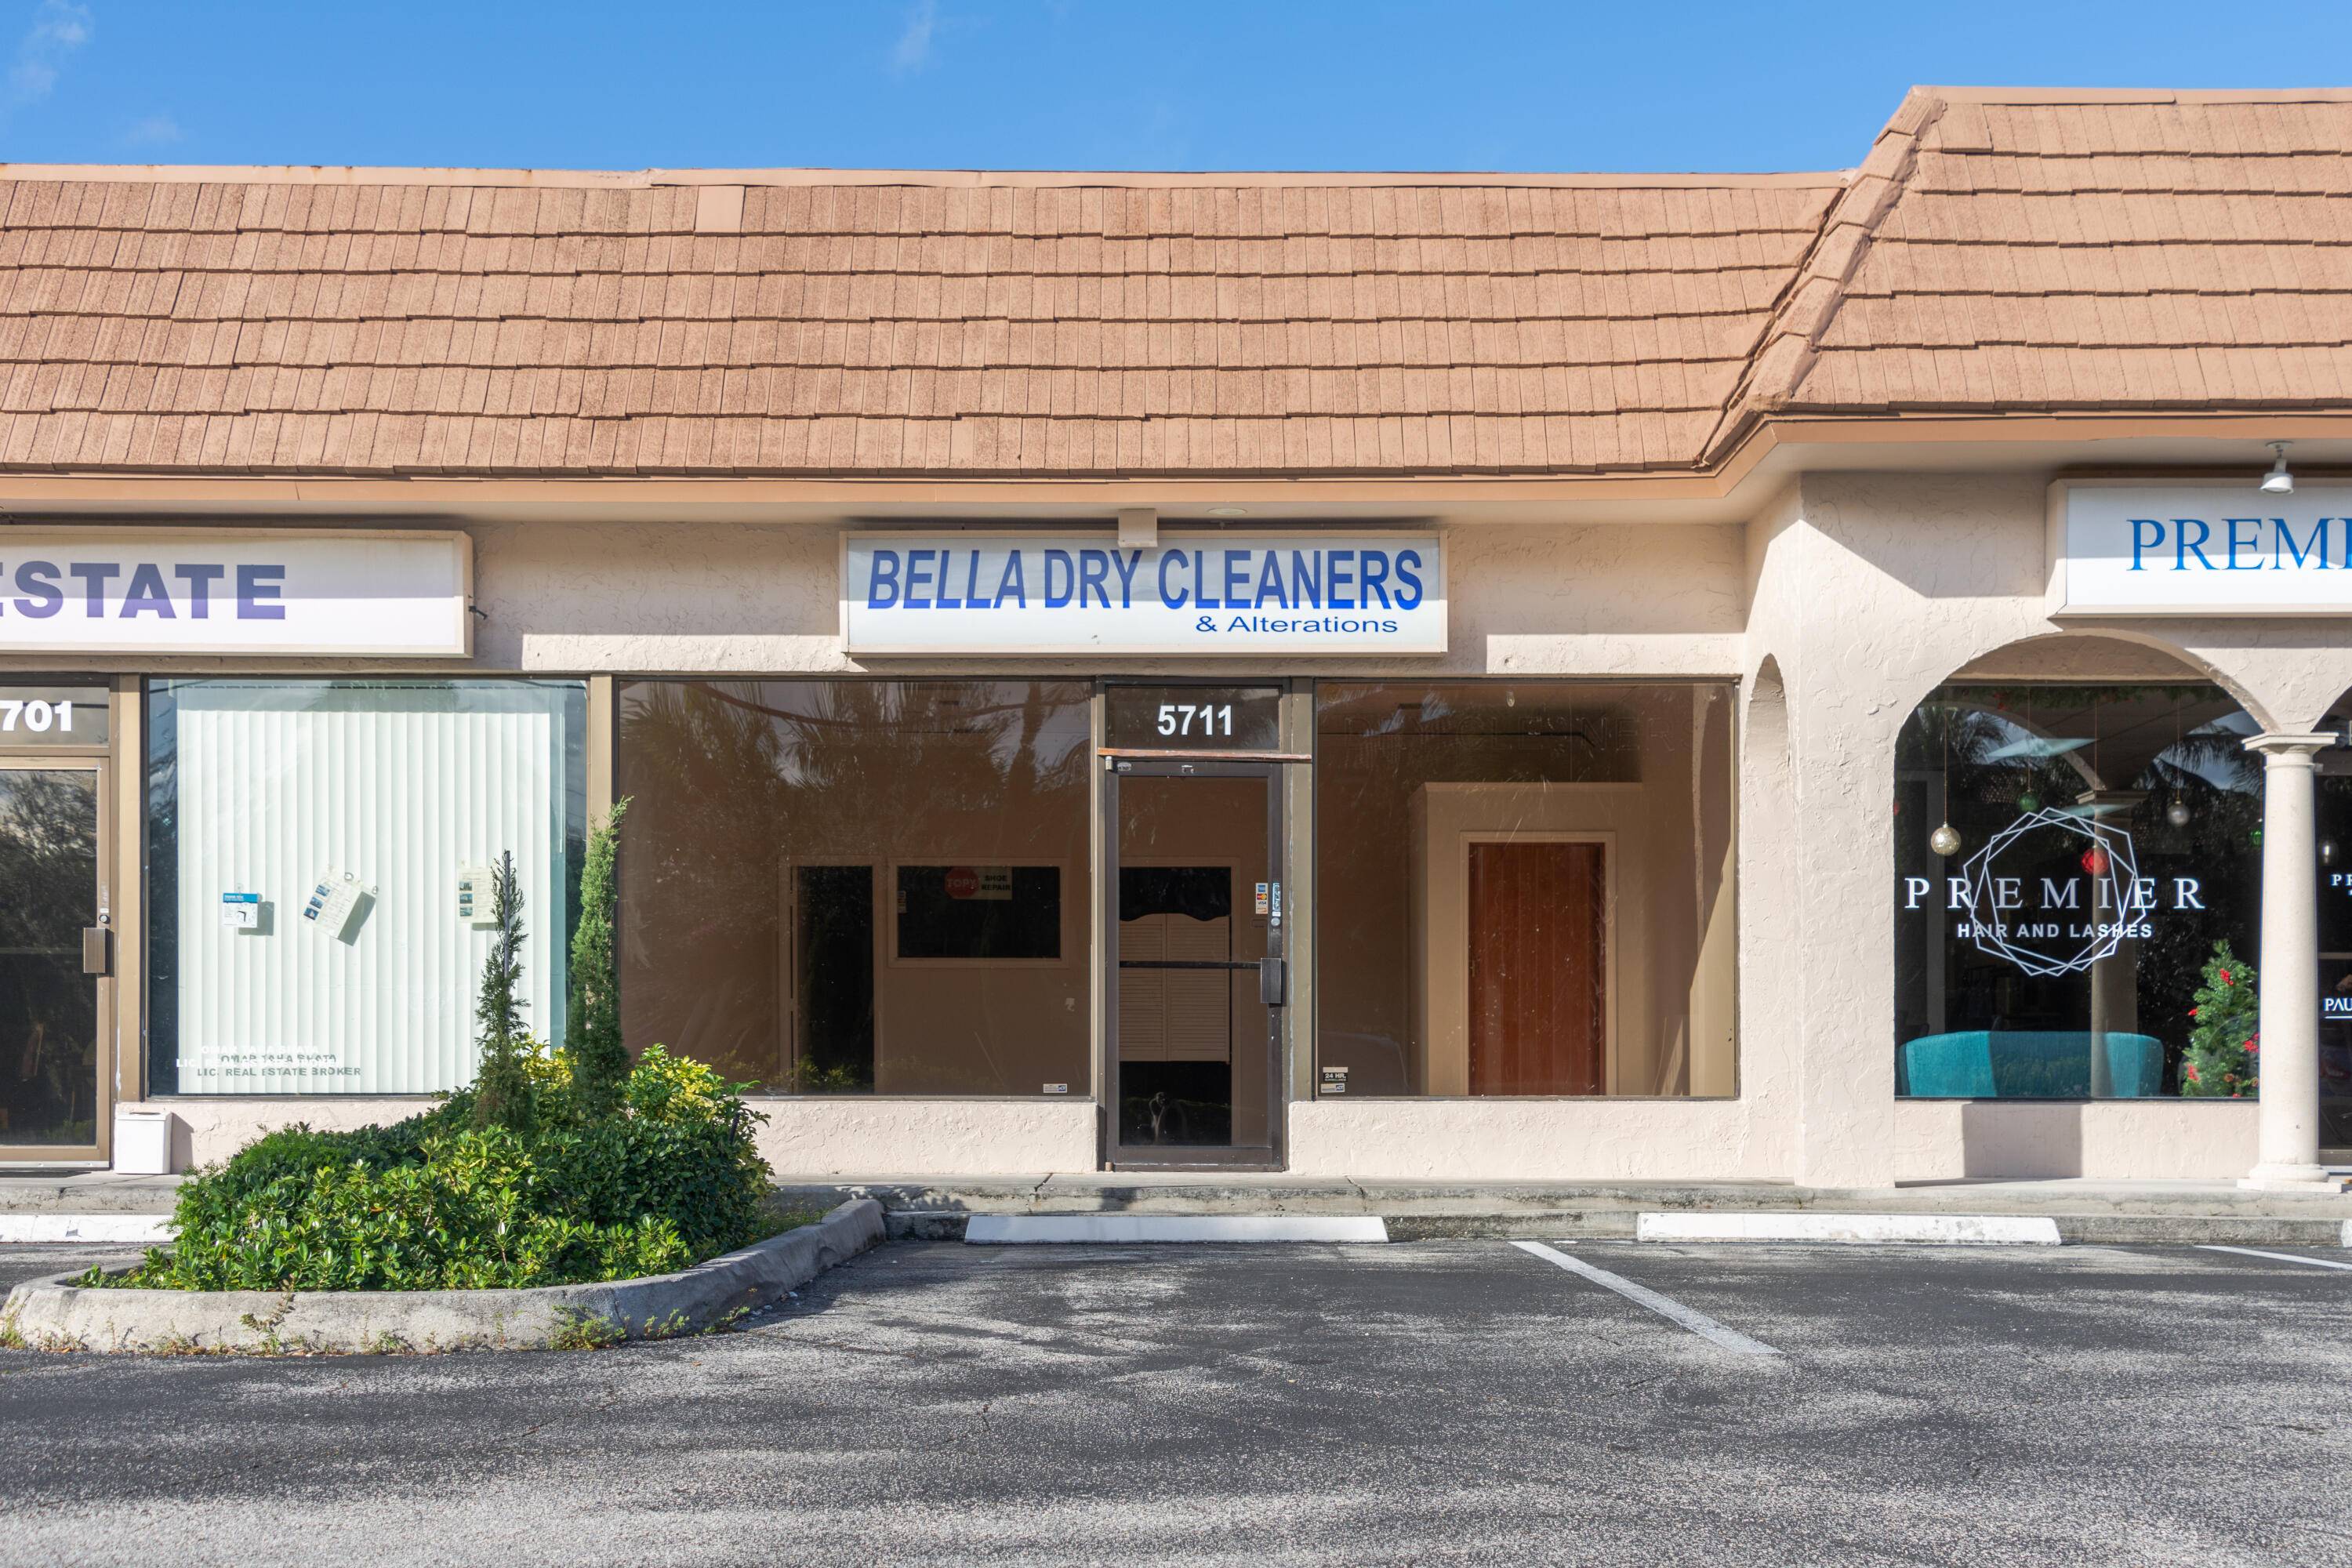 Josephine's Plaza is a 10, 000 square foot retail property located directly on Federal Highway in Boca Raton with over 220' of frontage.